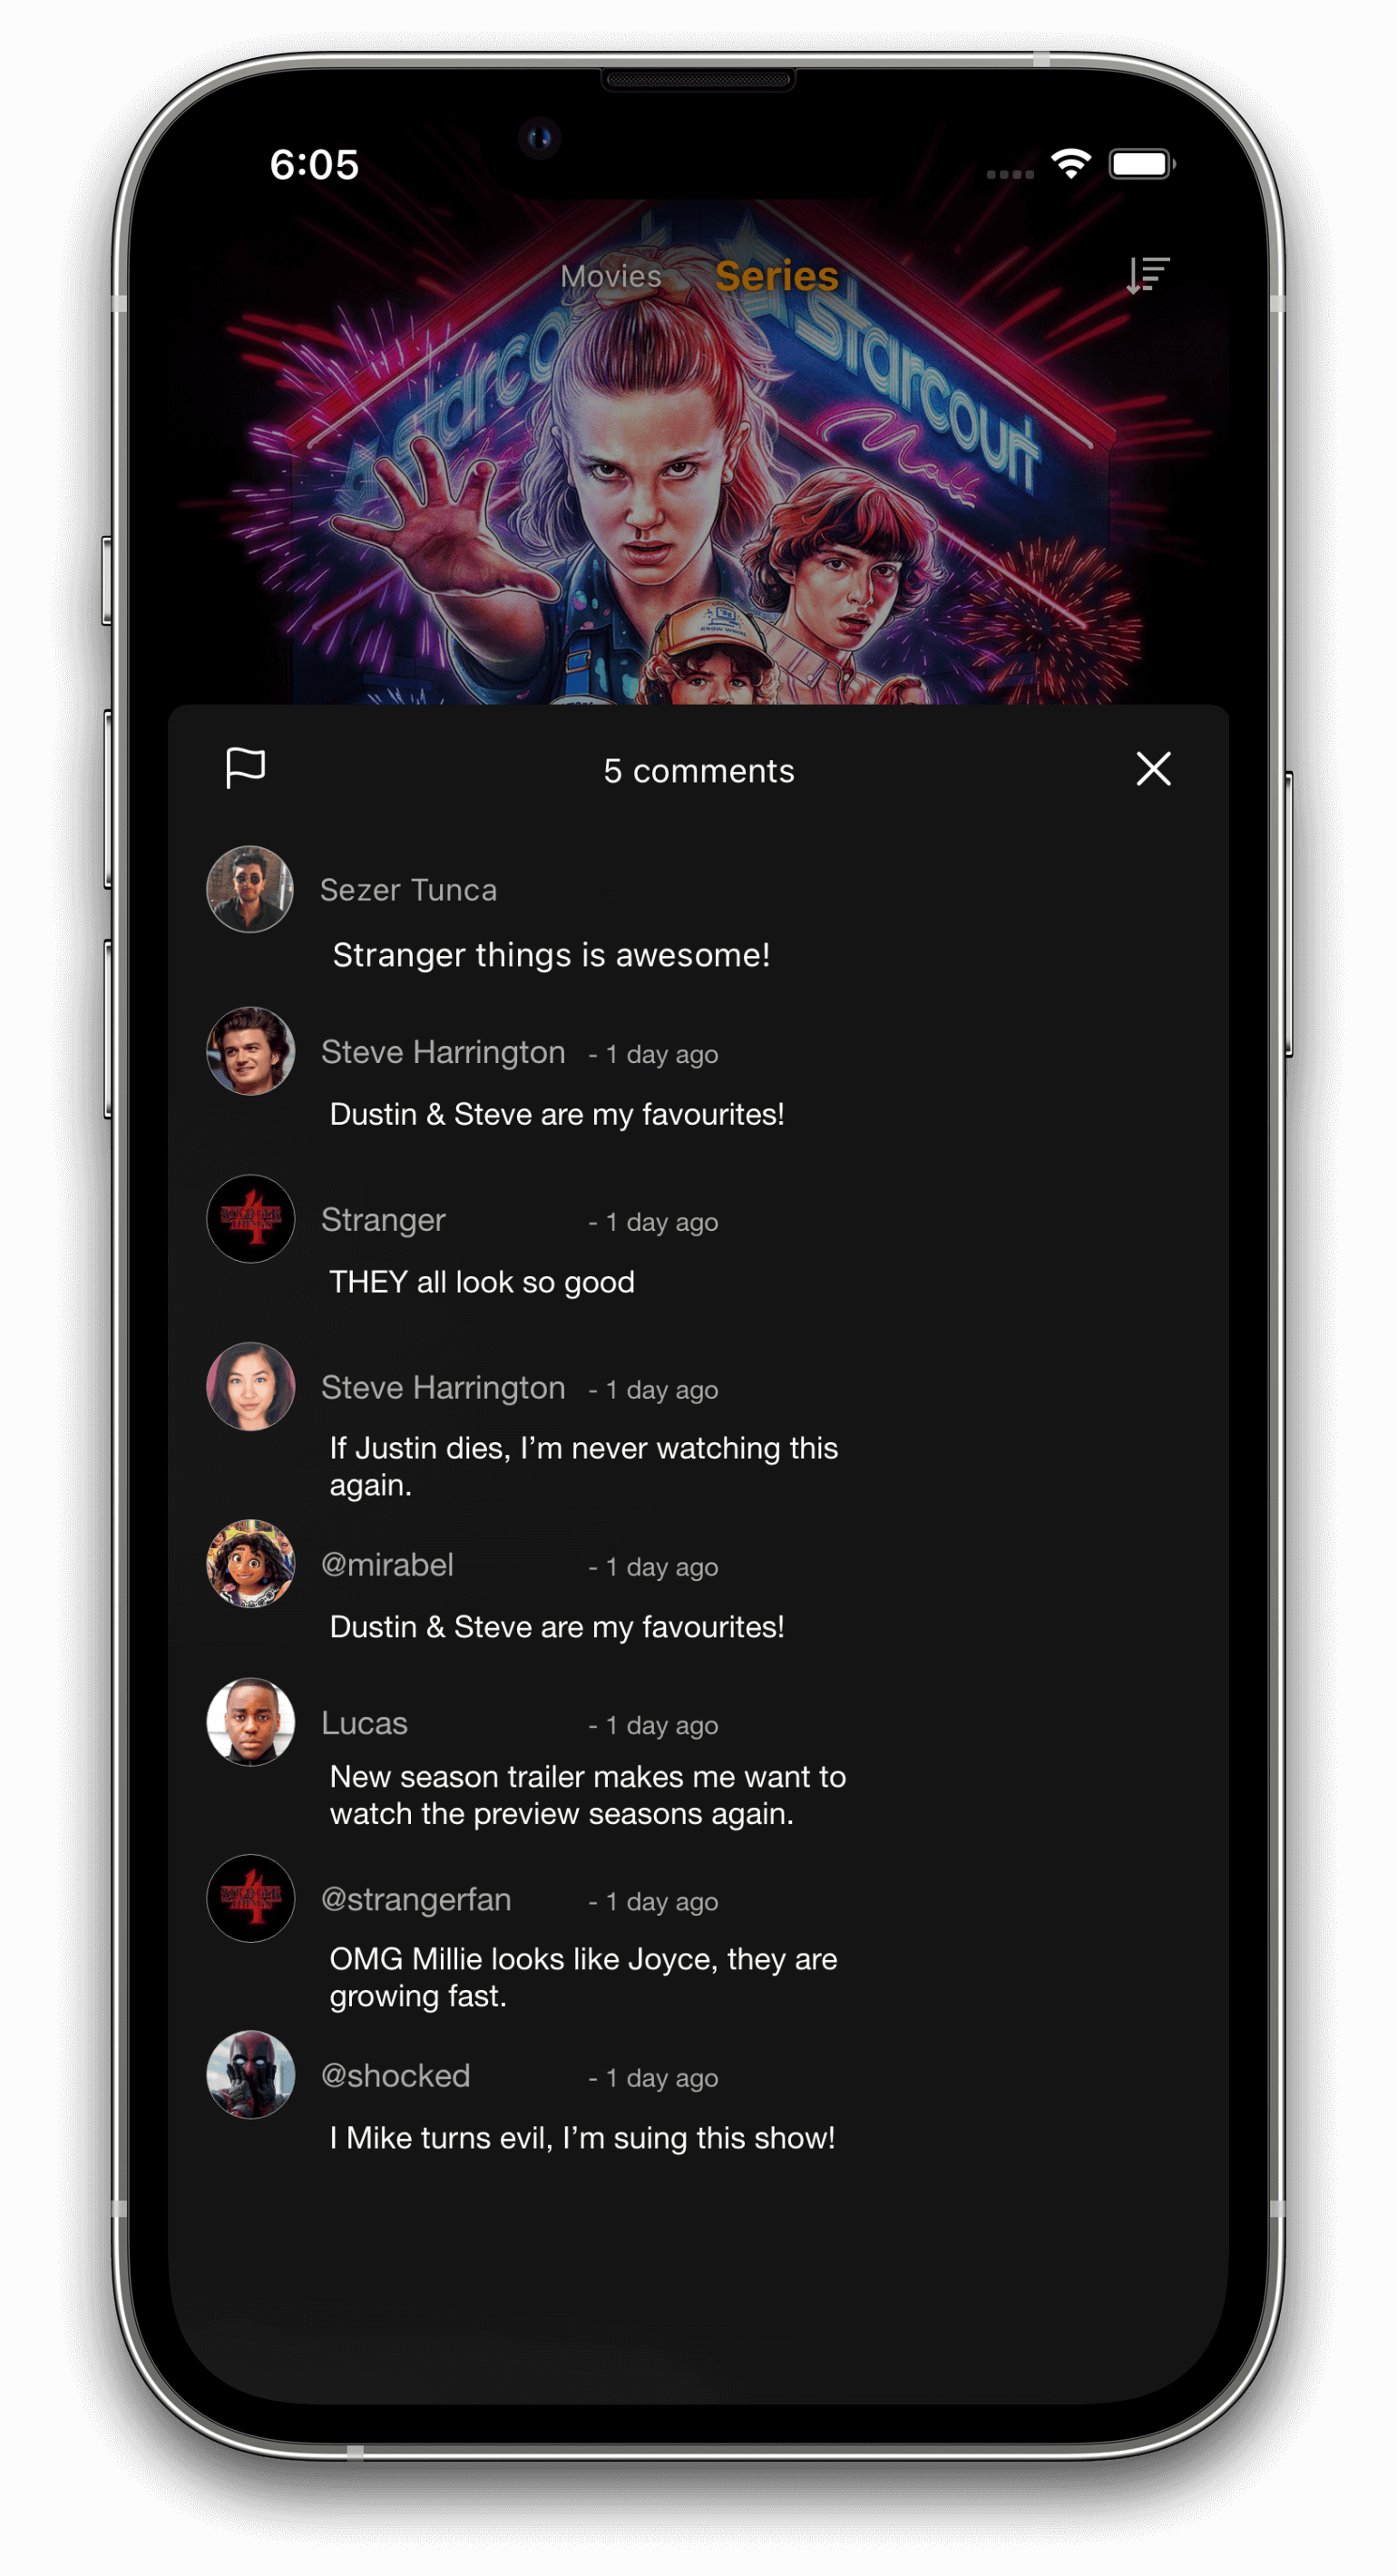 Device showing movie & TV show comments